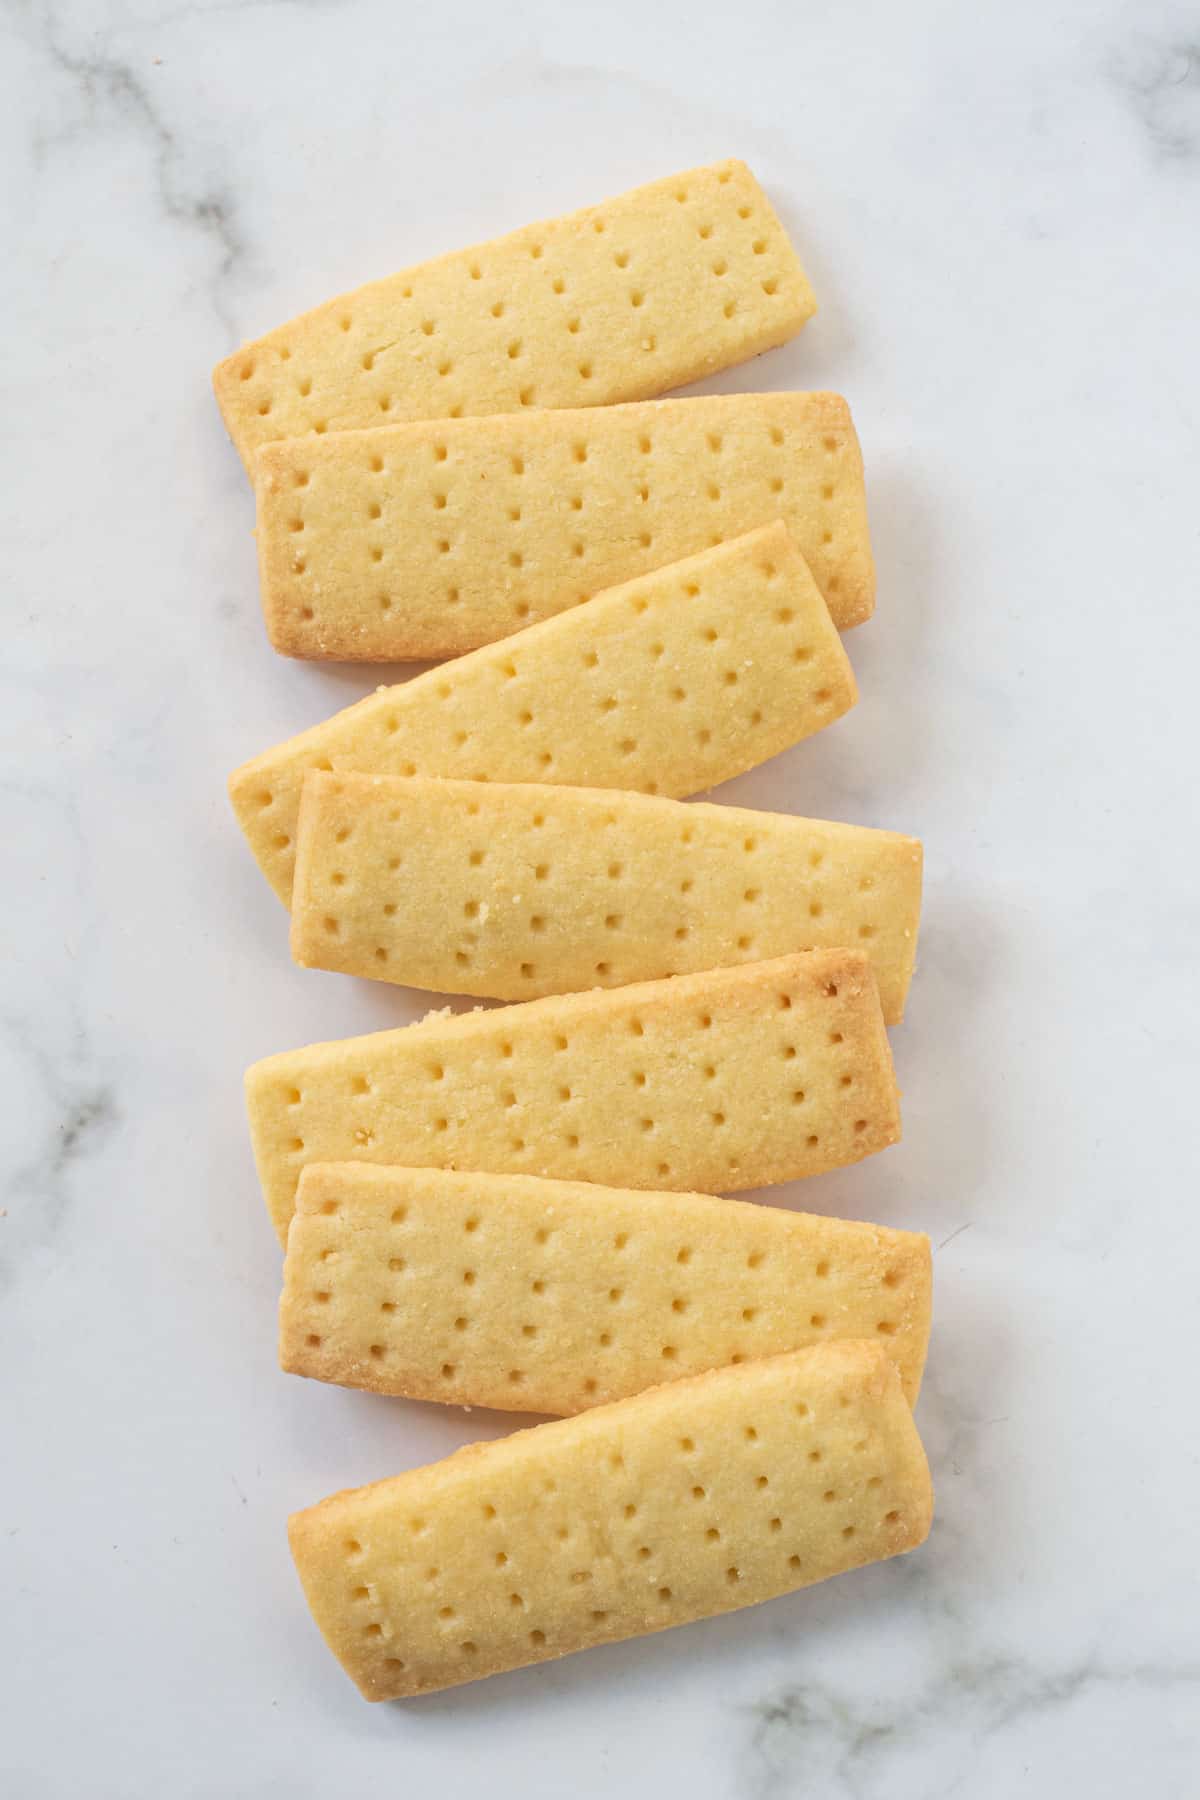 Shortbread cookies recipe - A row of rectangle shaped shortbread cookies against a marble background